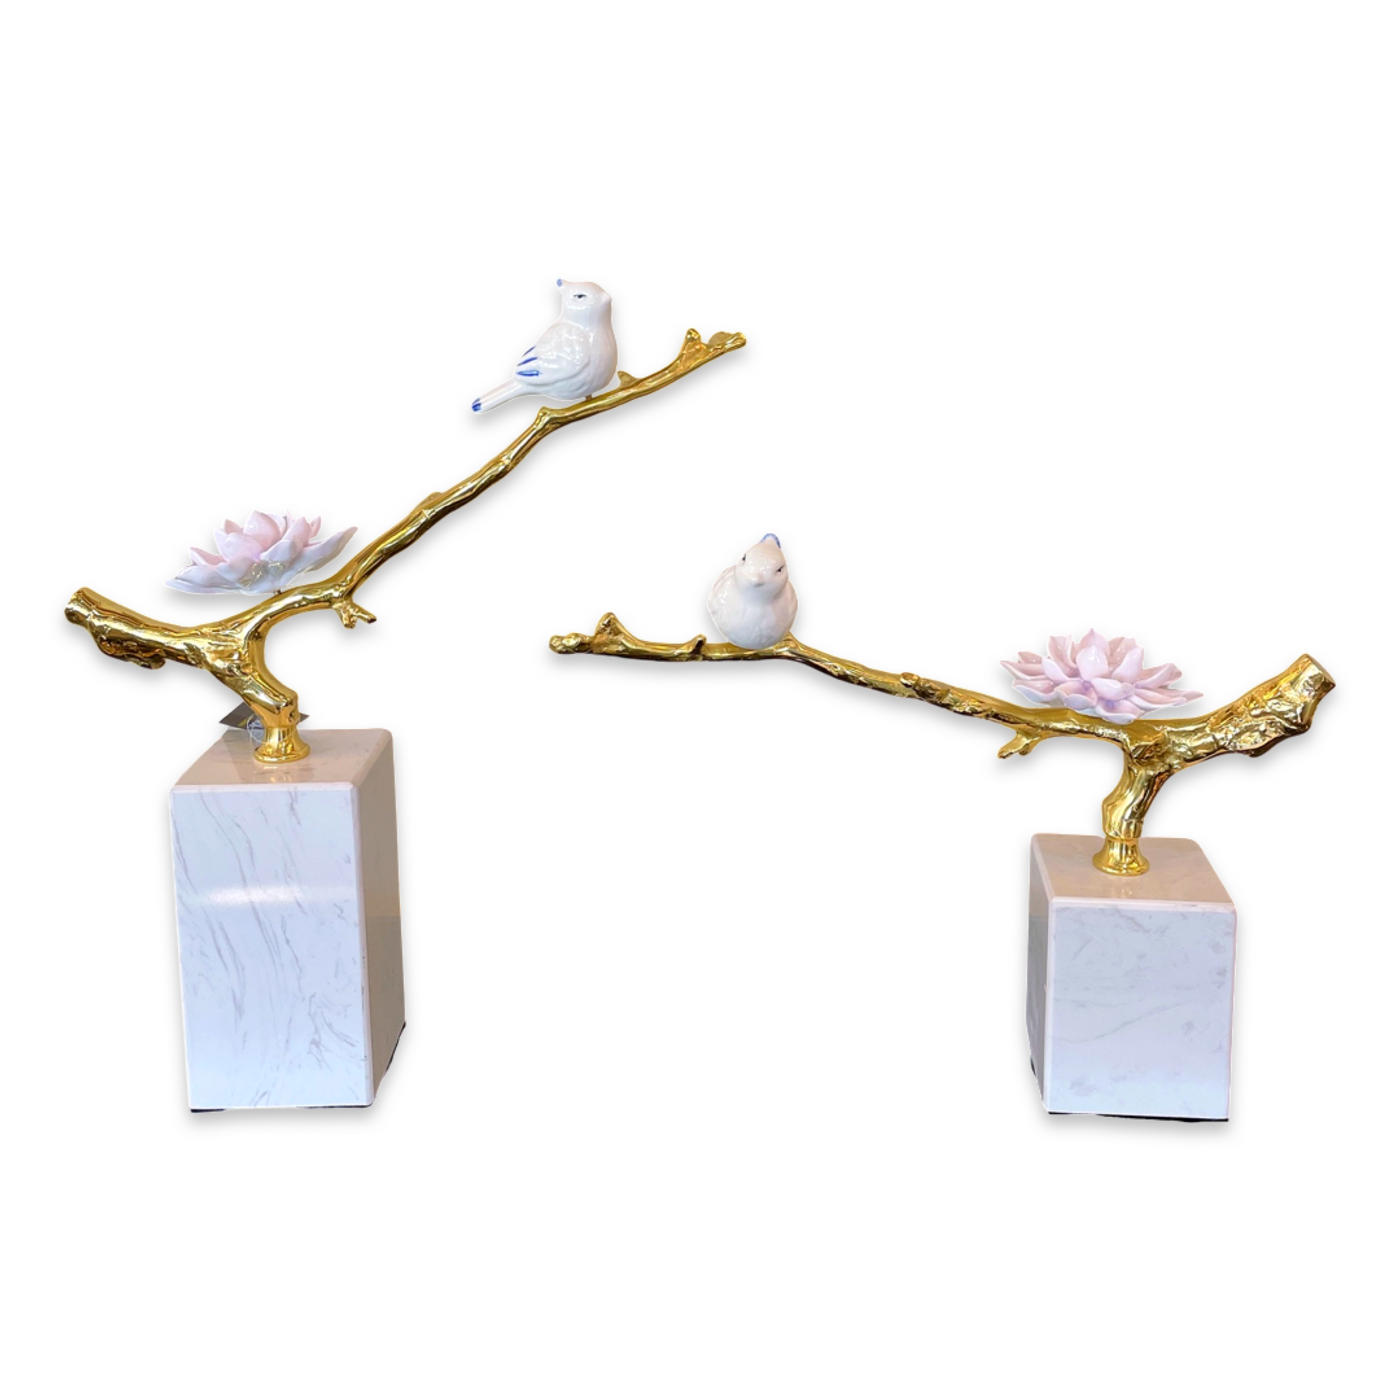 Serenity Birds on Branches Sculpture (set of 2)